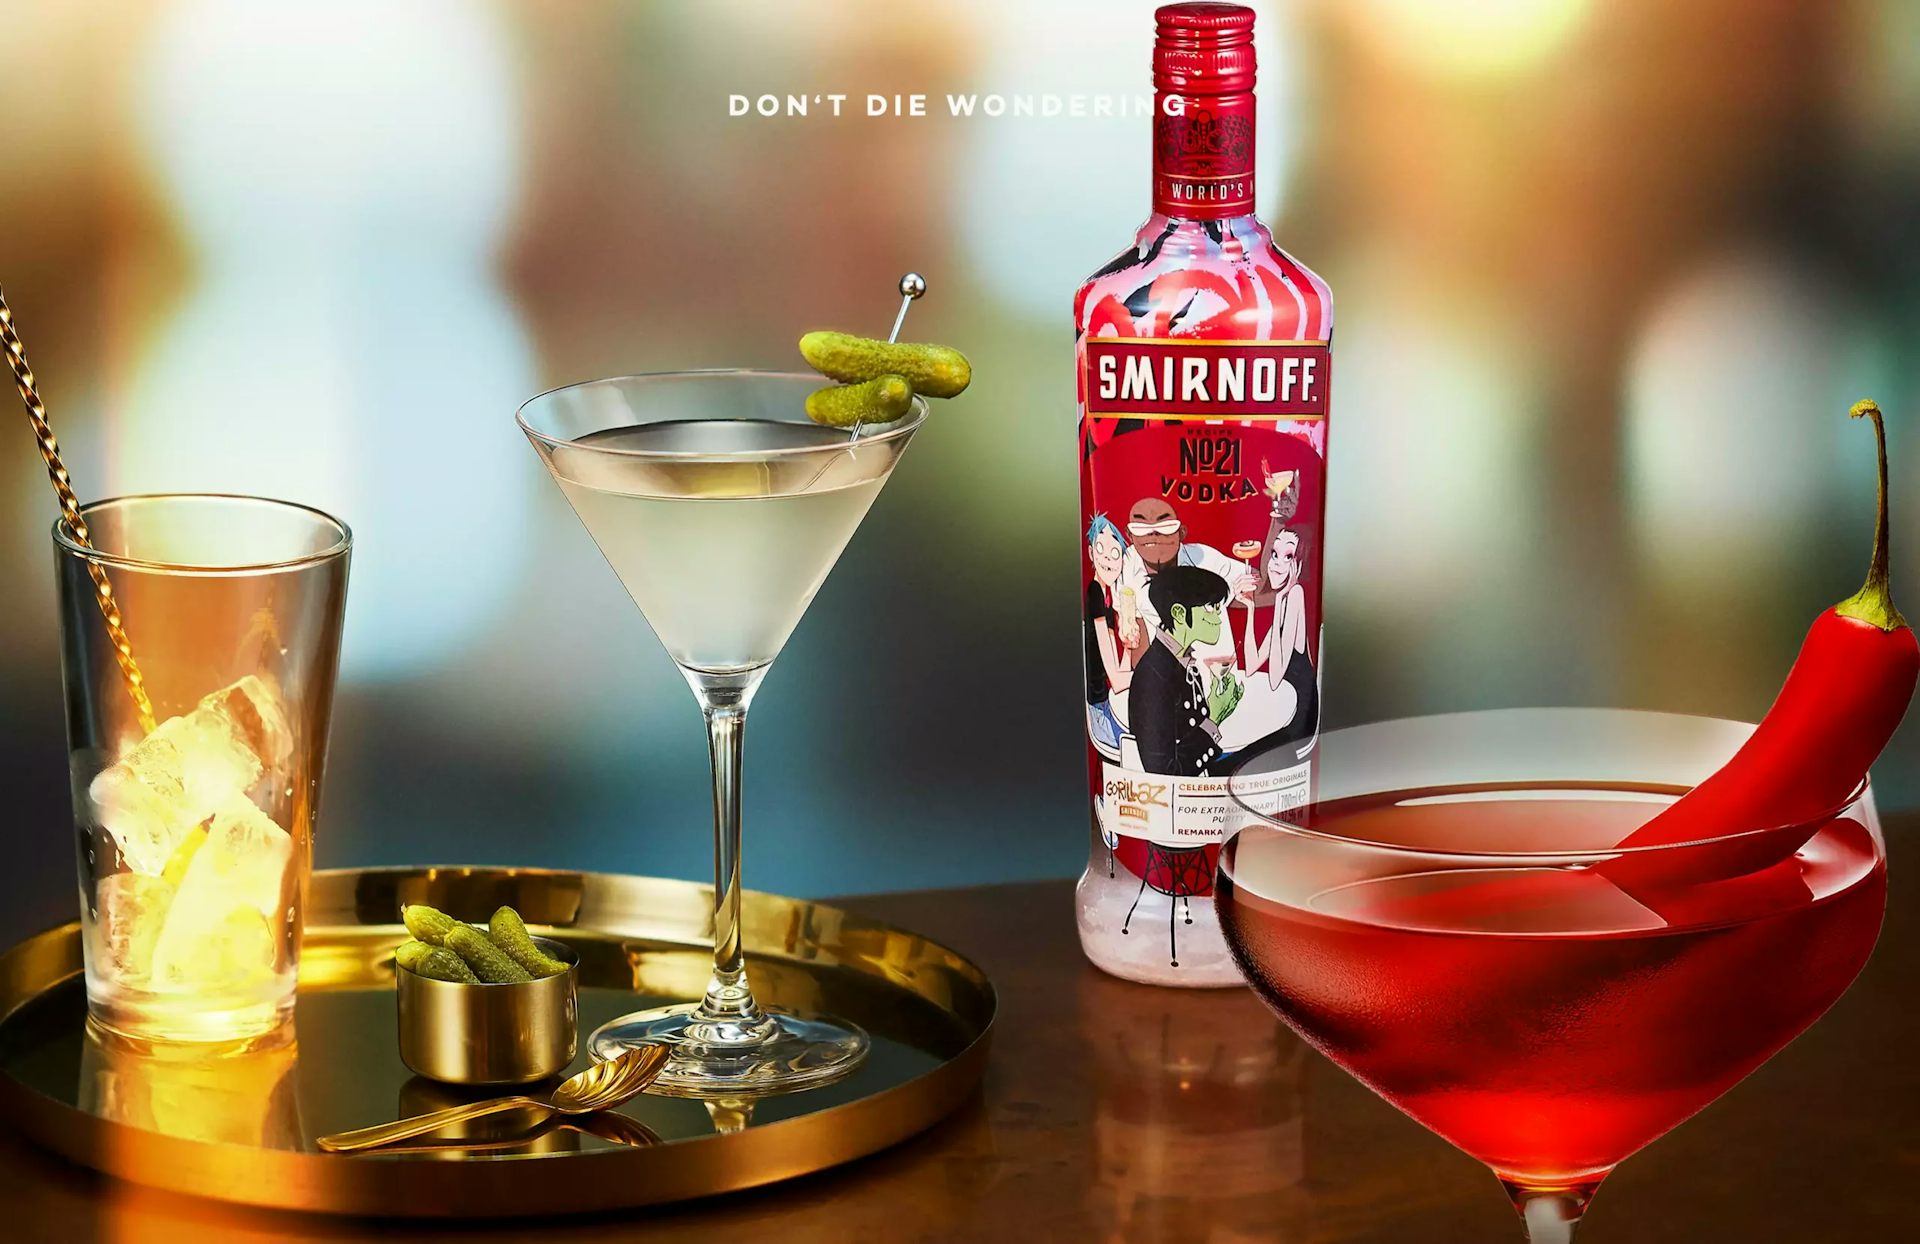 Smirnoff and Gorillaz Want to Spice Up Your Favorite Cocktails